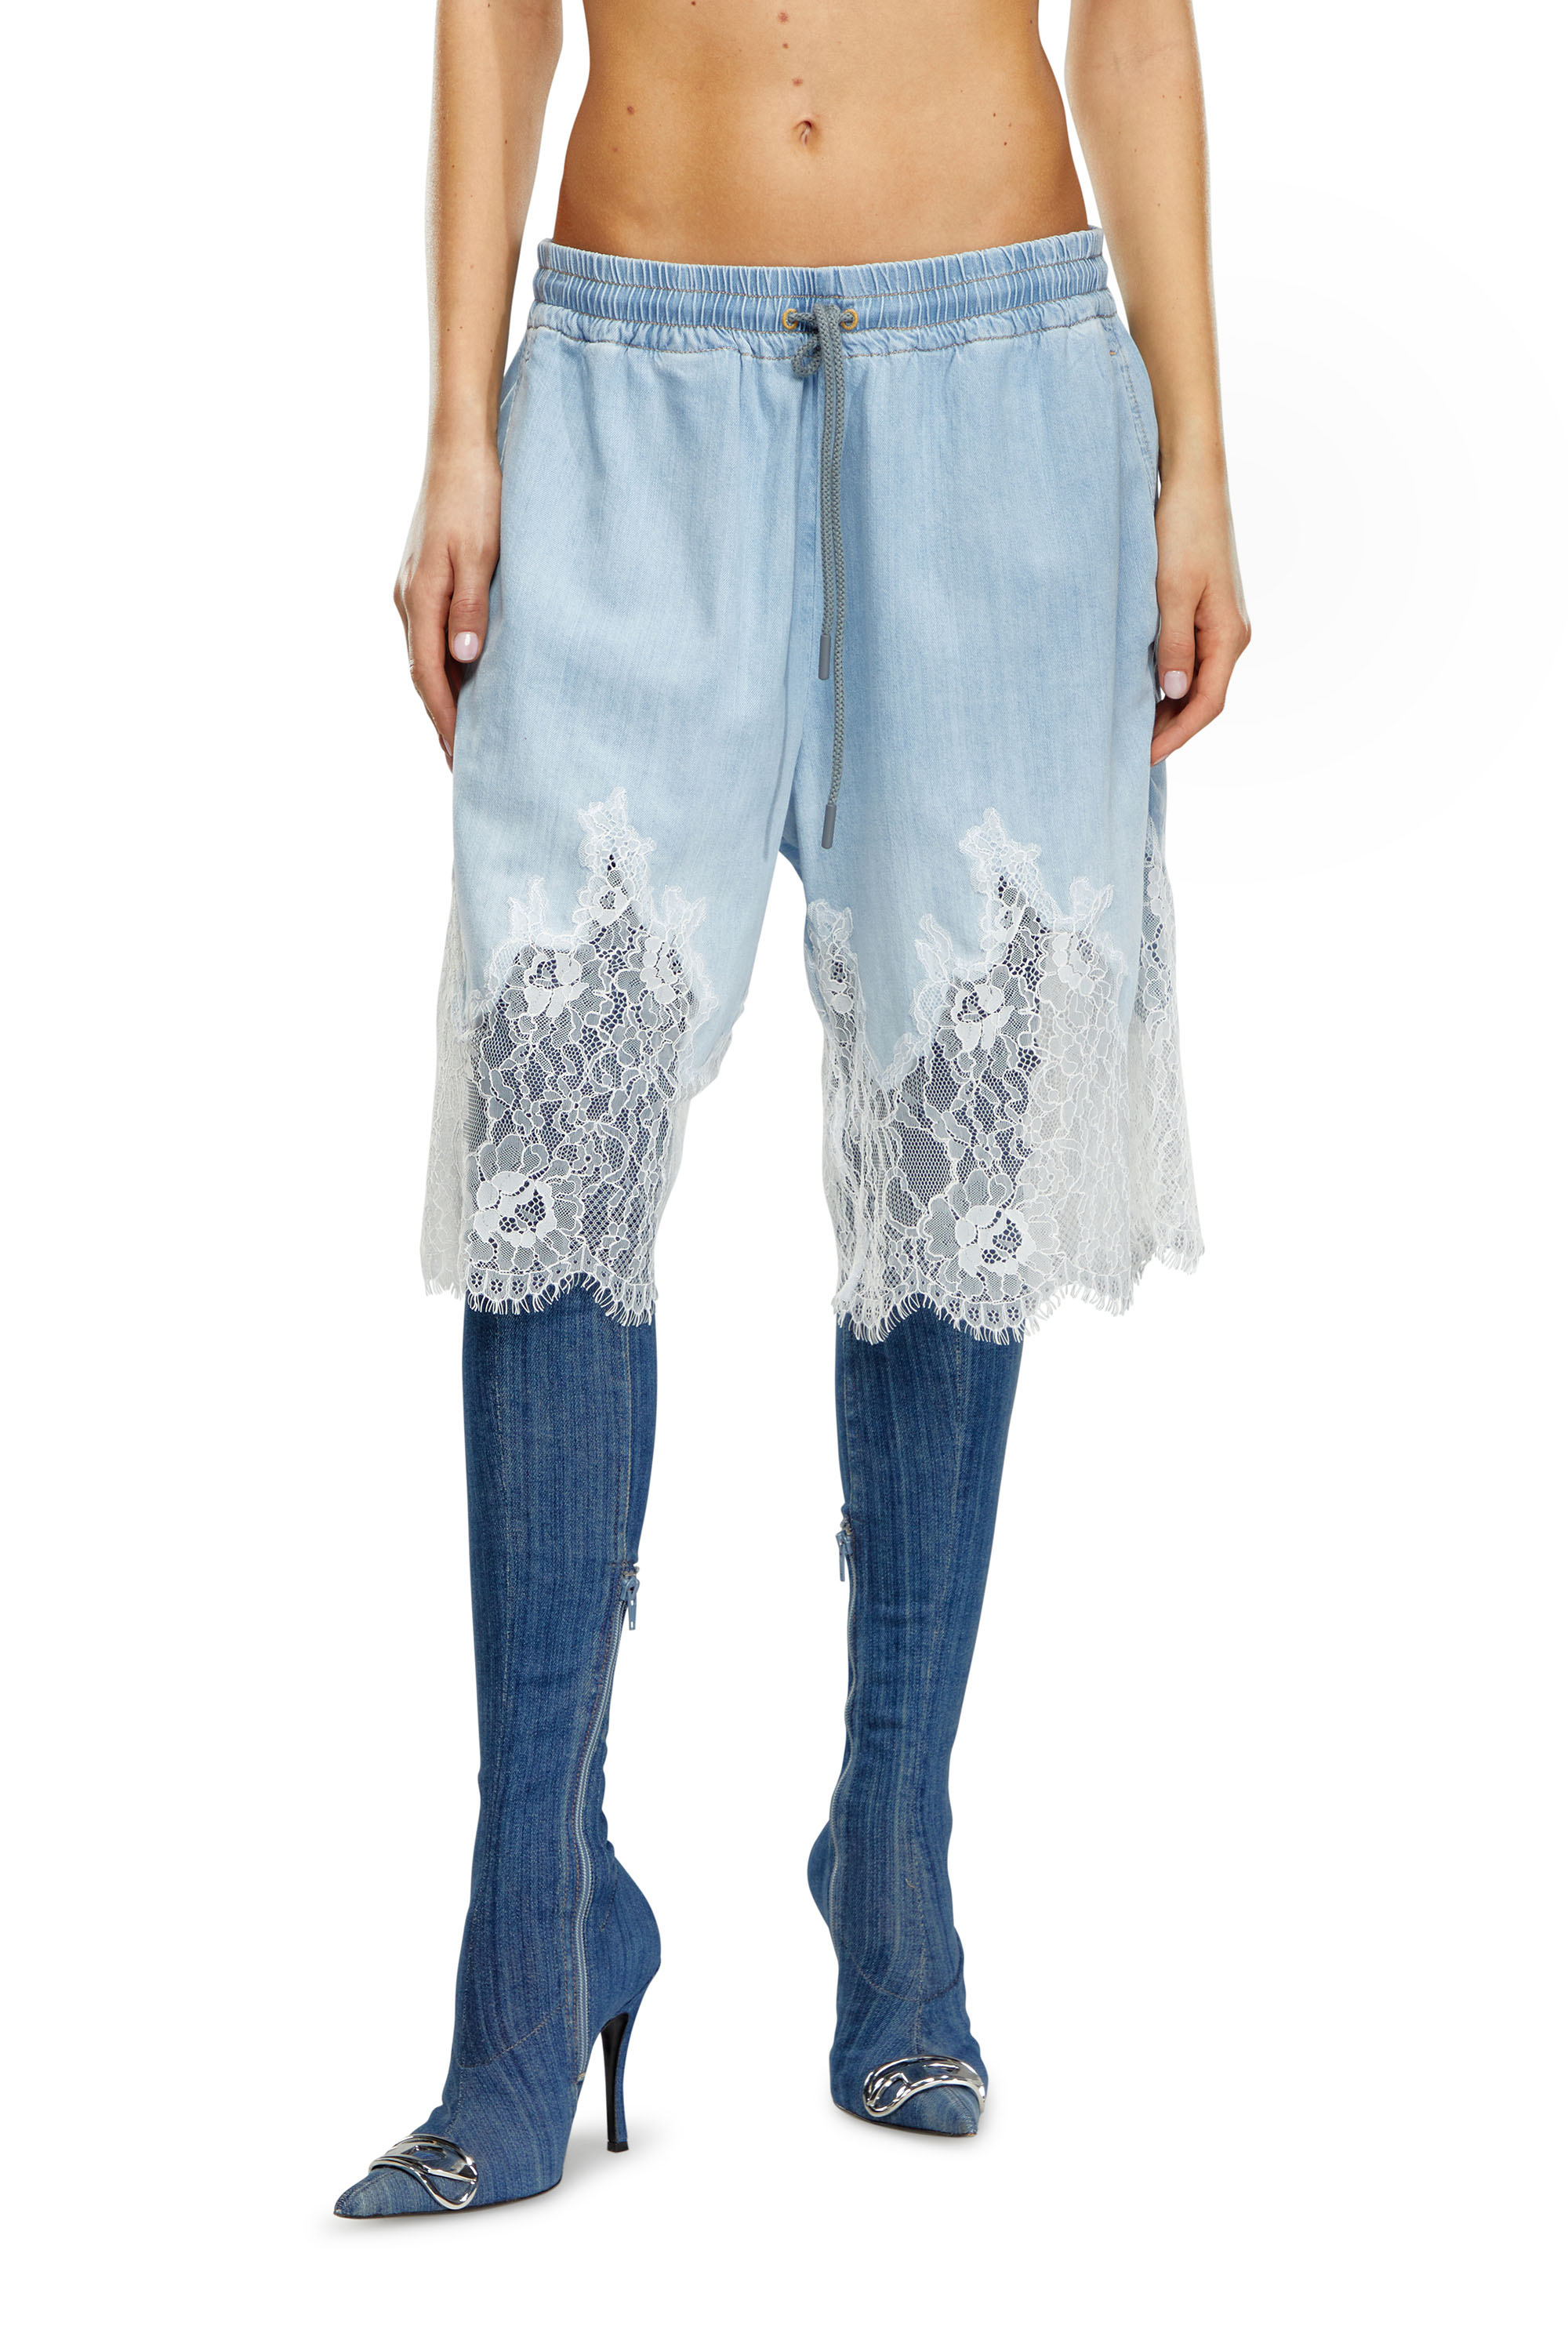 Diesel - Bermuda shorts in denim and lace - Shorts - Woman - Blue